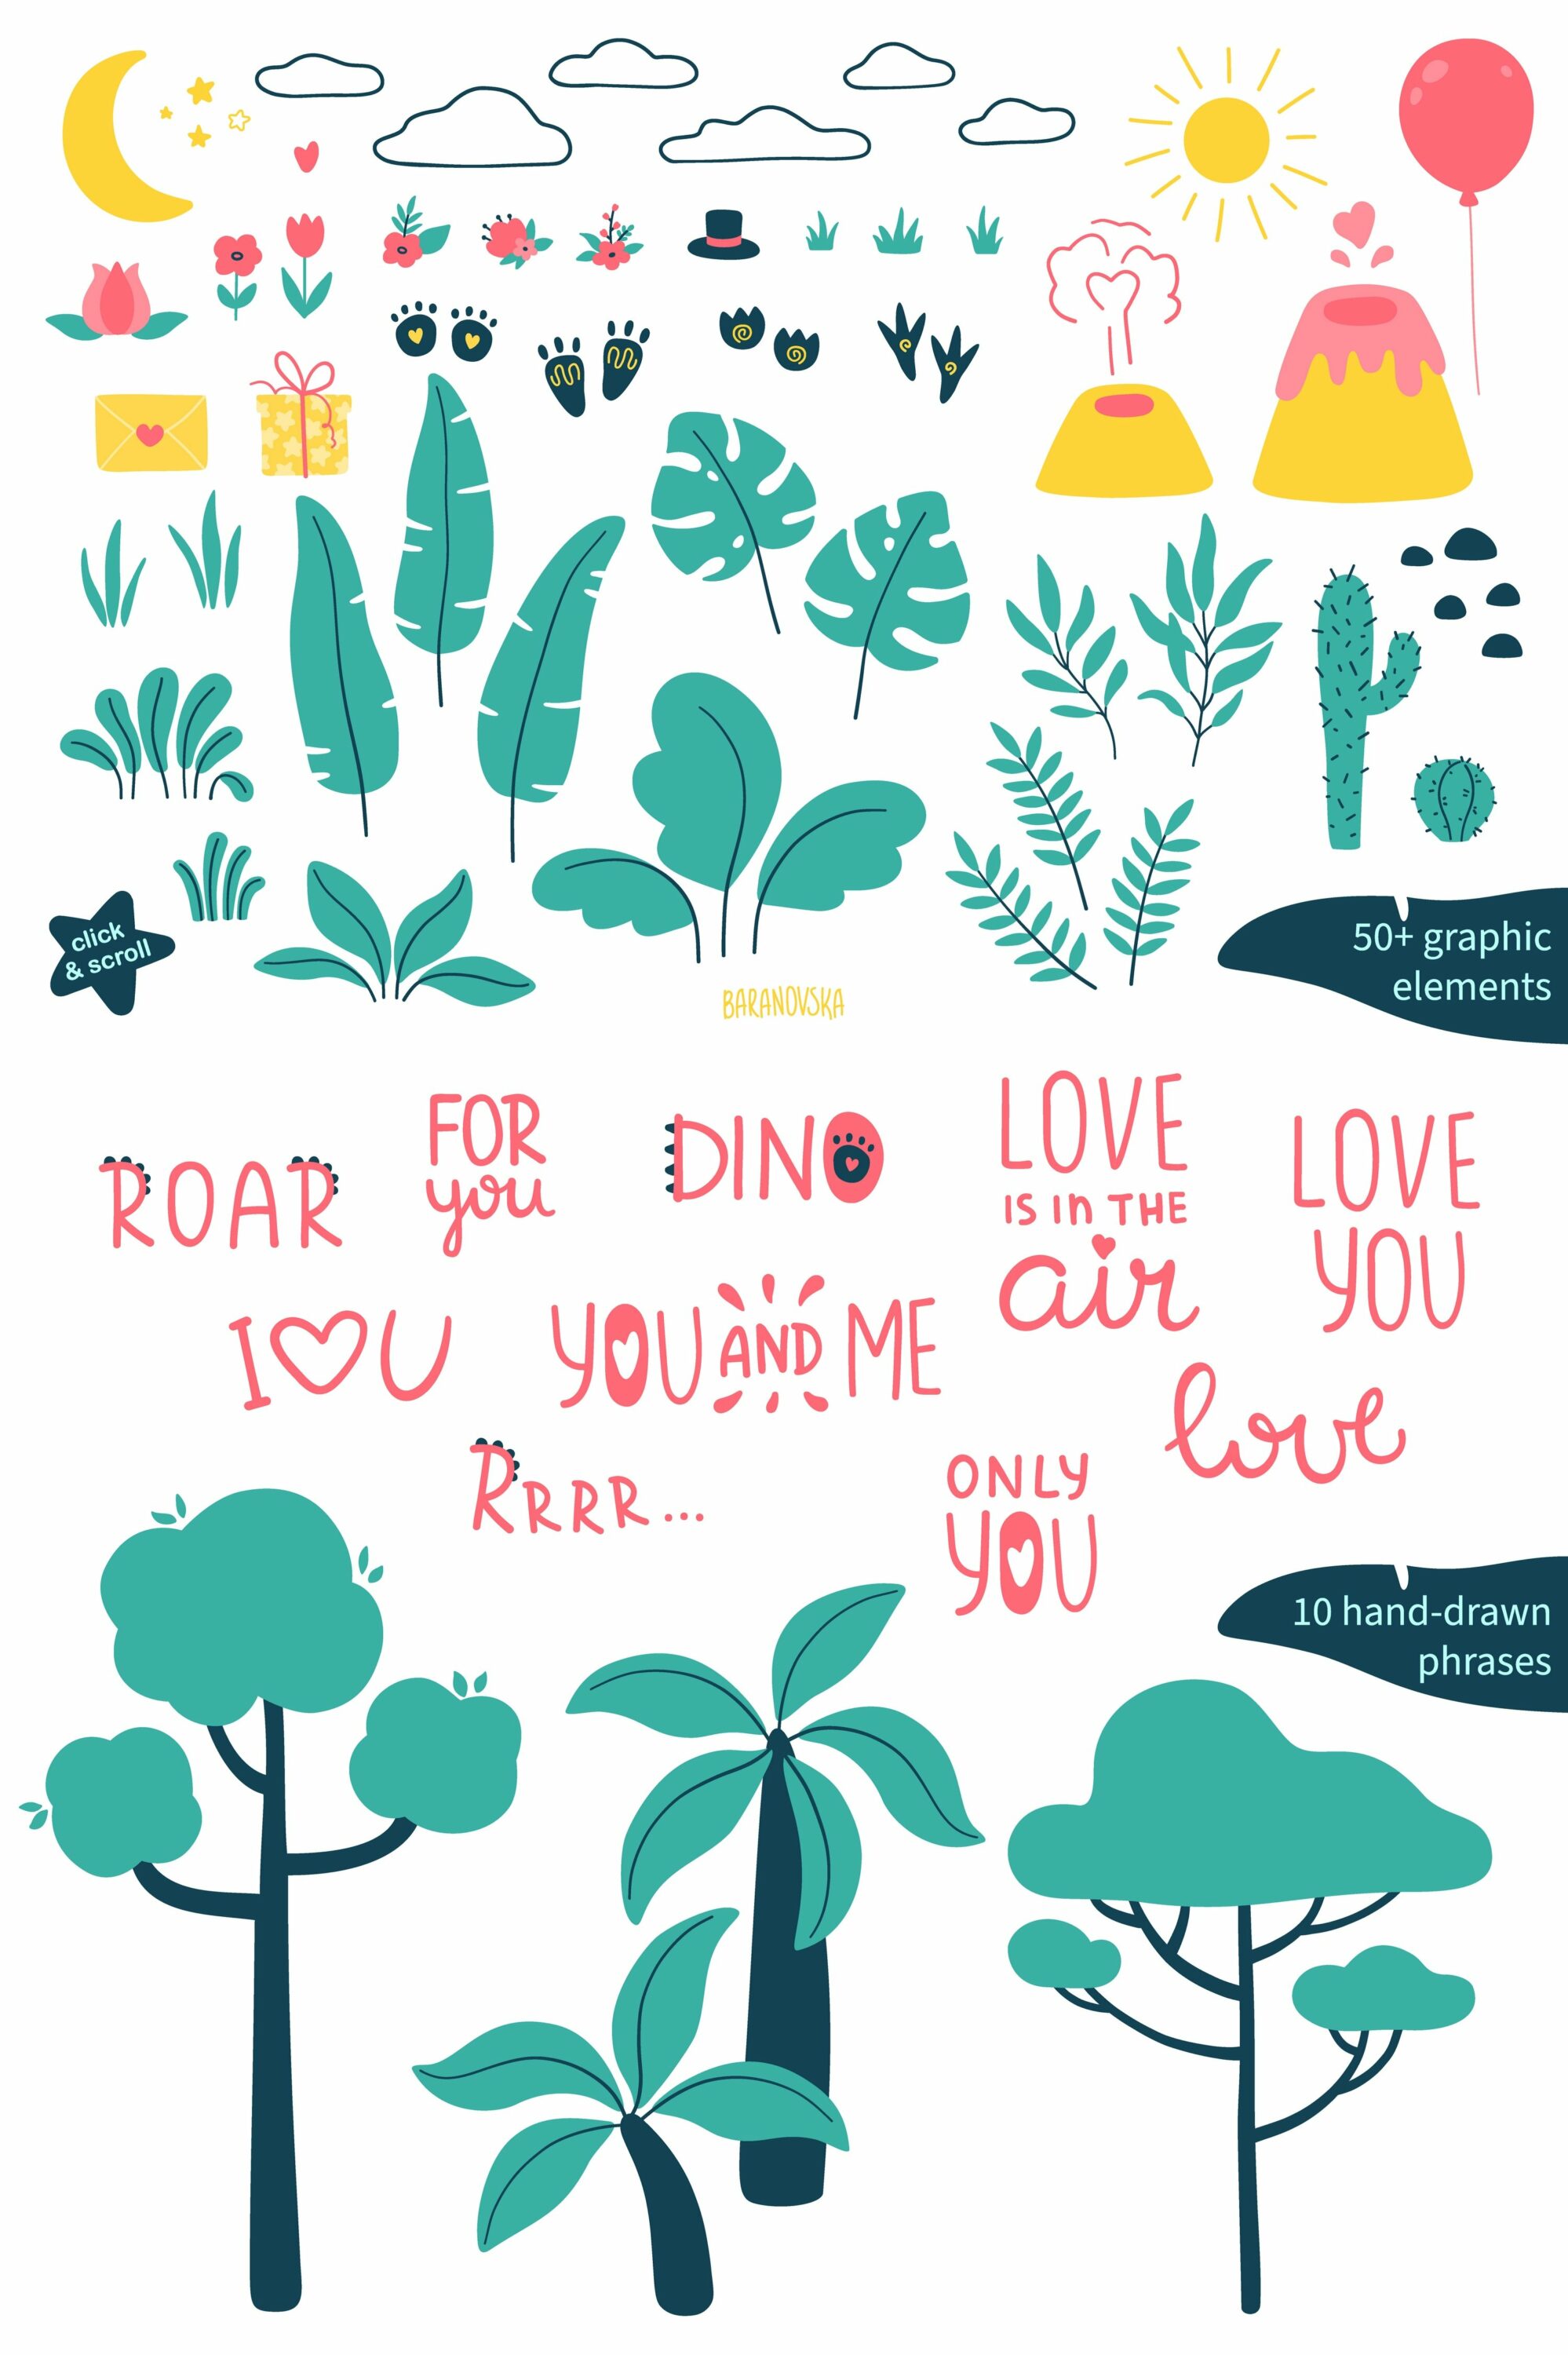 dino love clipart and patterns pinterest.